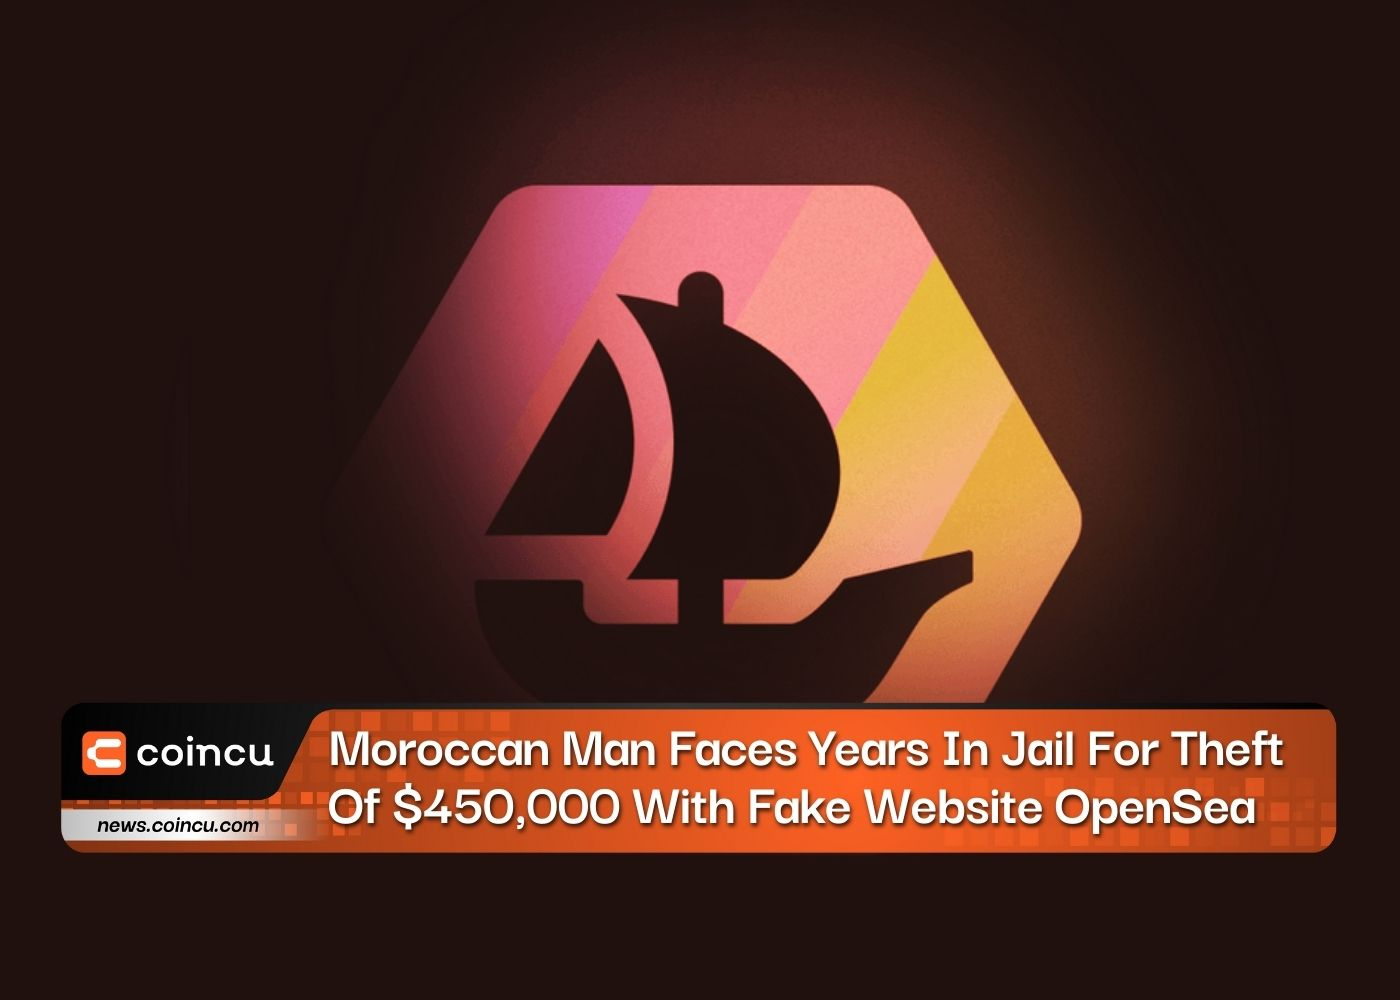 Moroccan Man Faces Years In Jail For Theft Of $450,000 With Fake Website OpenSea